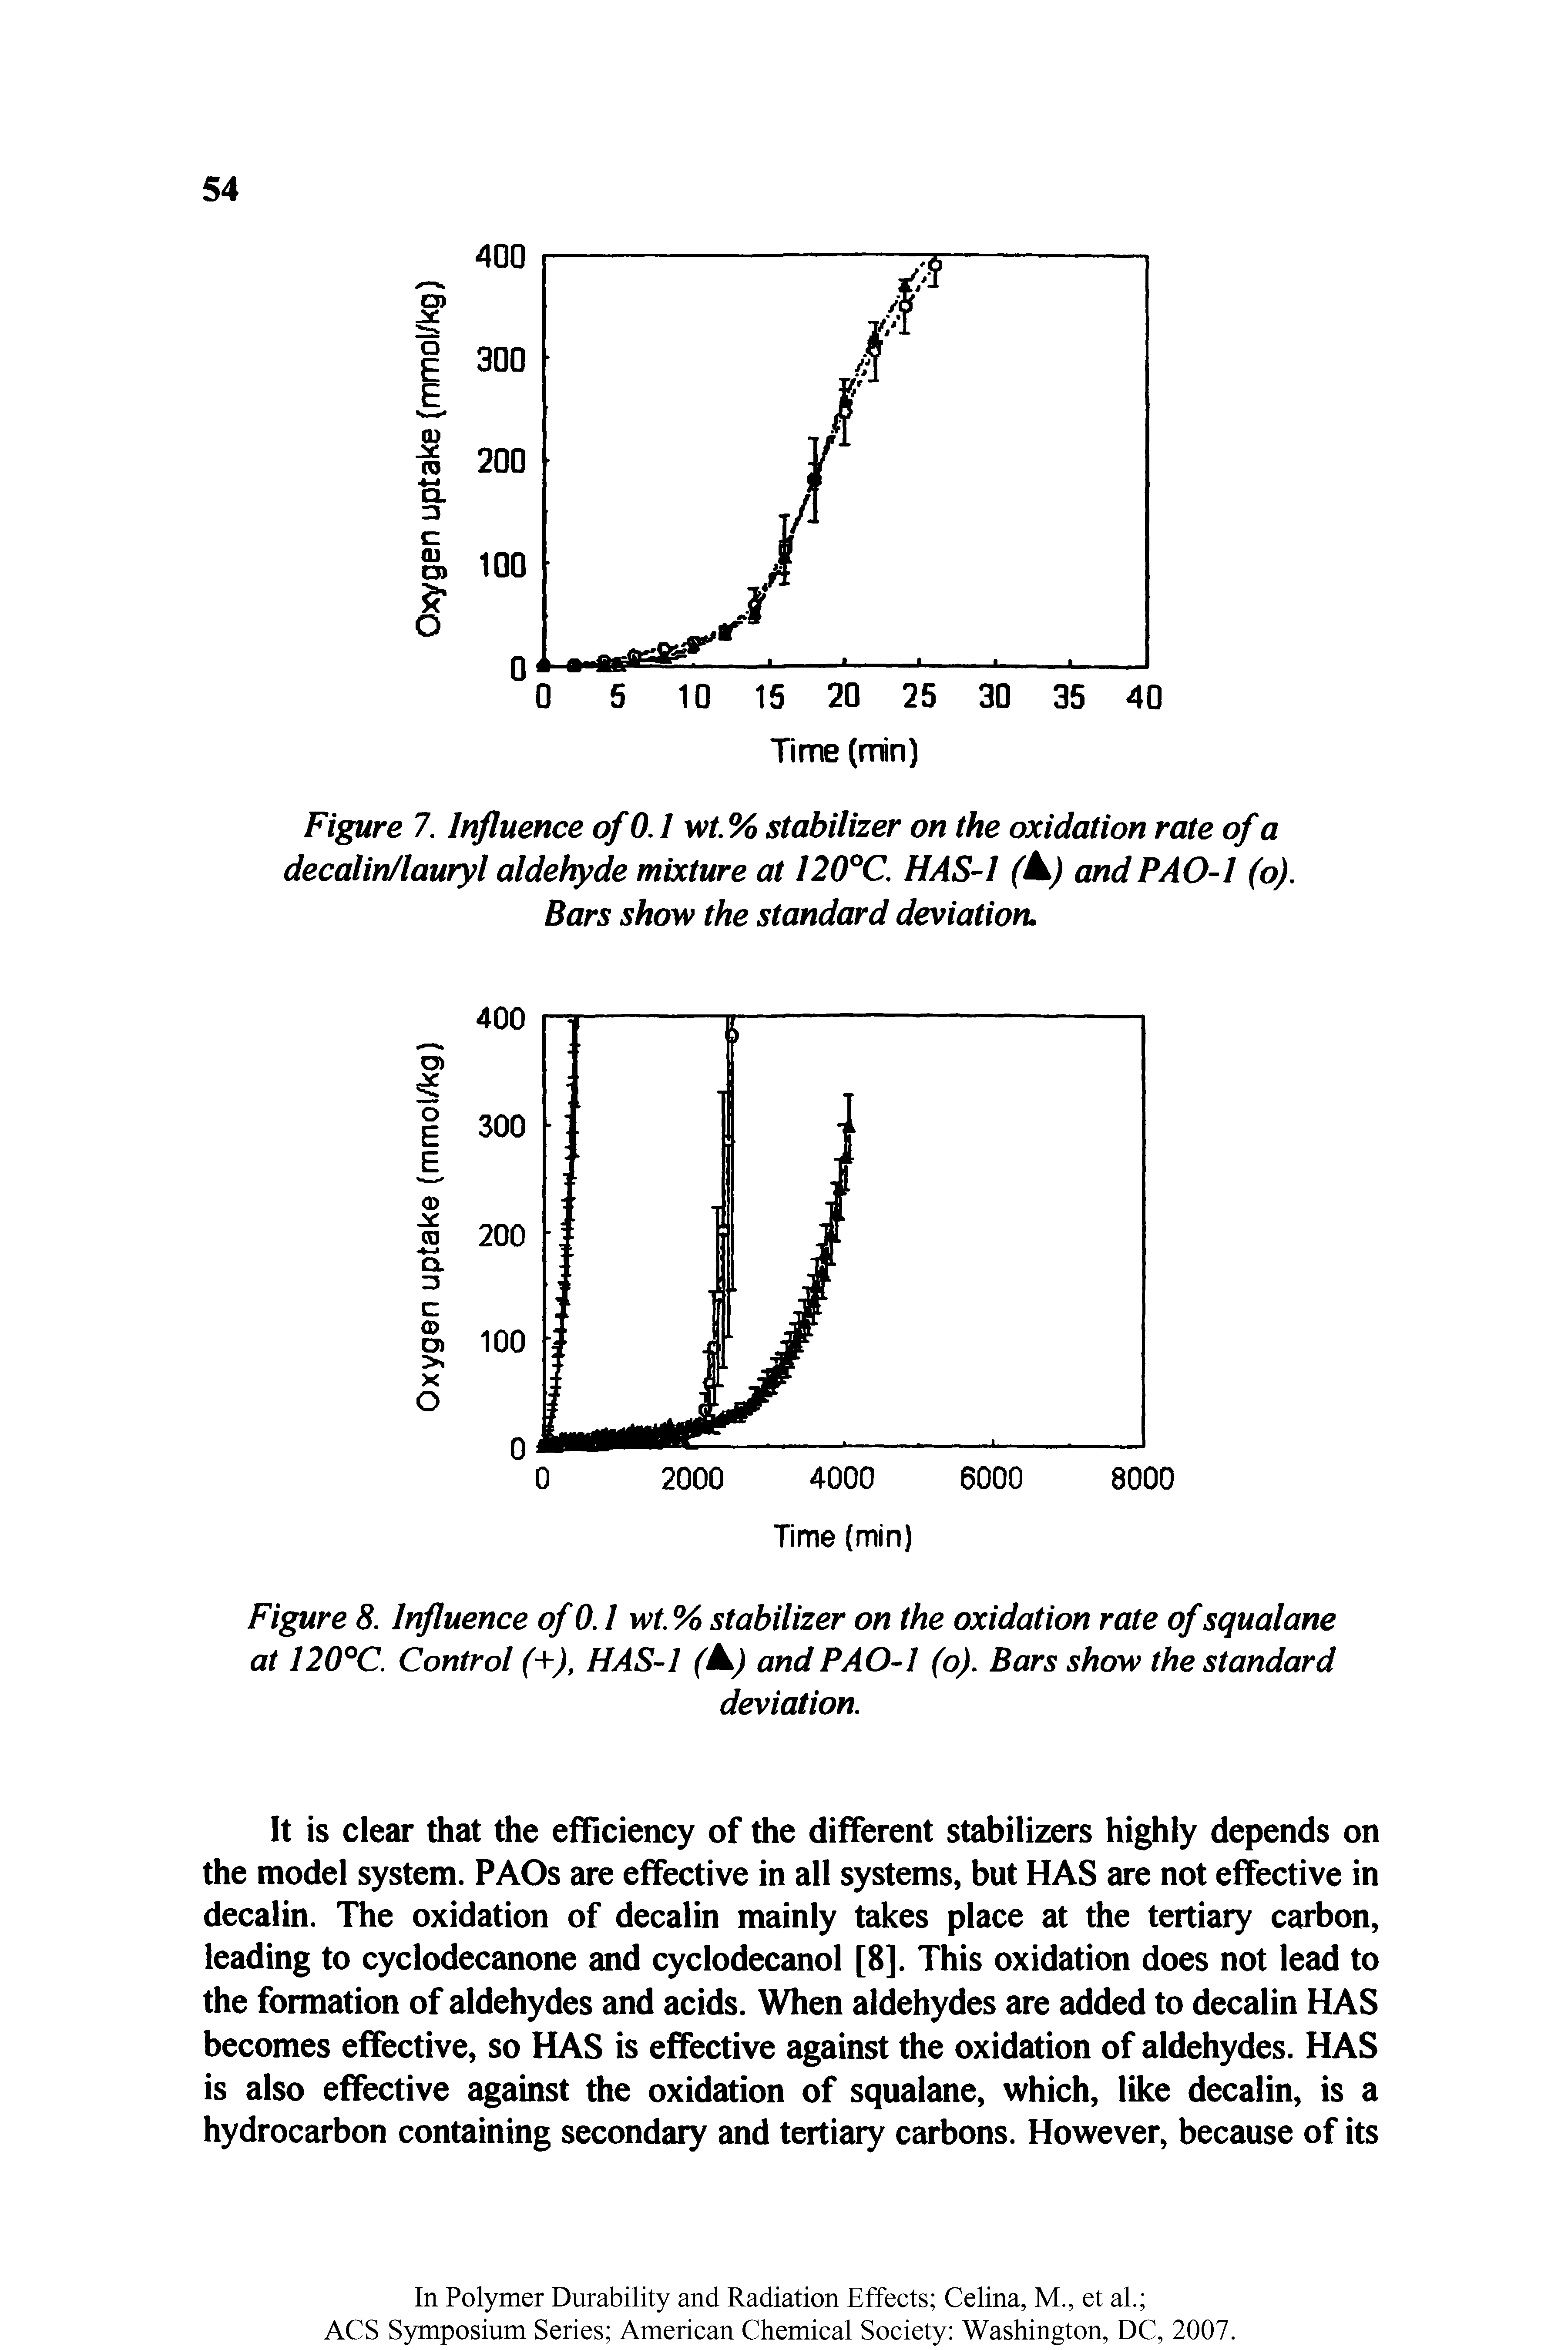 Figure 7. Influence of 0.1 wt. % stabilizer on the oxidation rate of a decalin/lauryl aldehyde mixture at 120°C. HAS-1 ( ) andPAO-1 (o). Bars show the standard deviation.